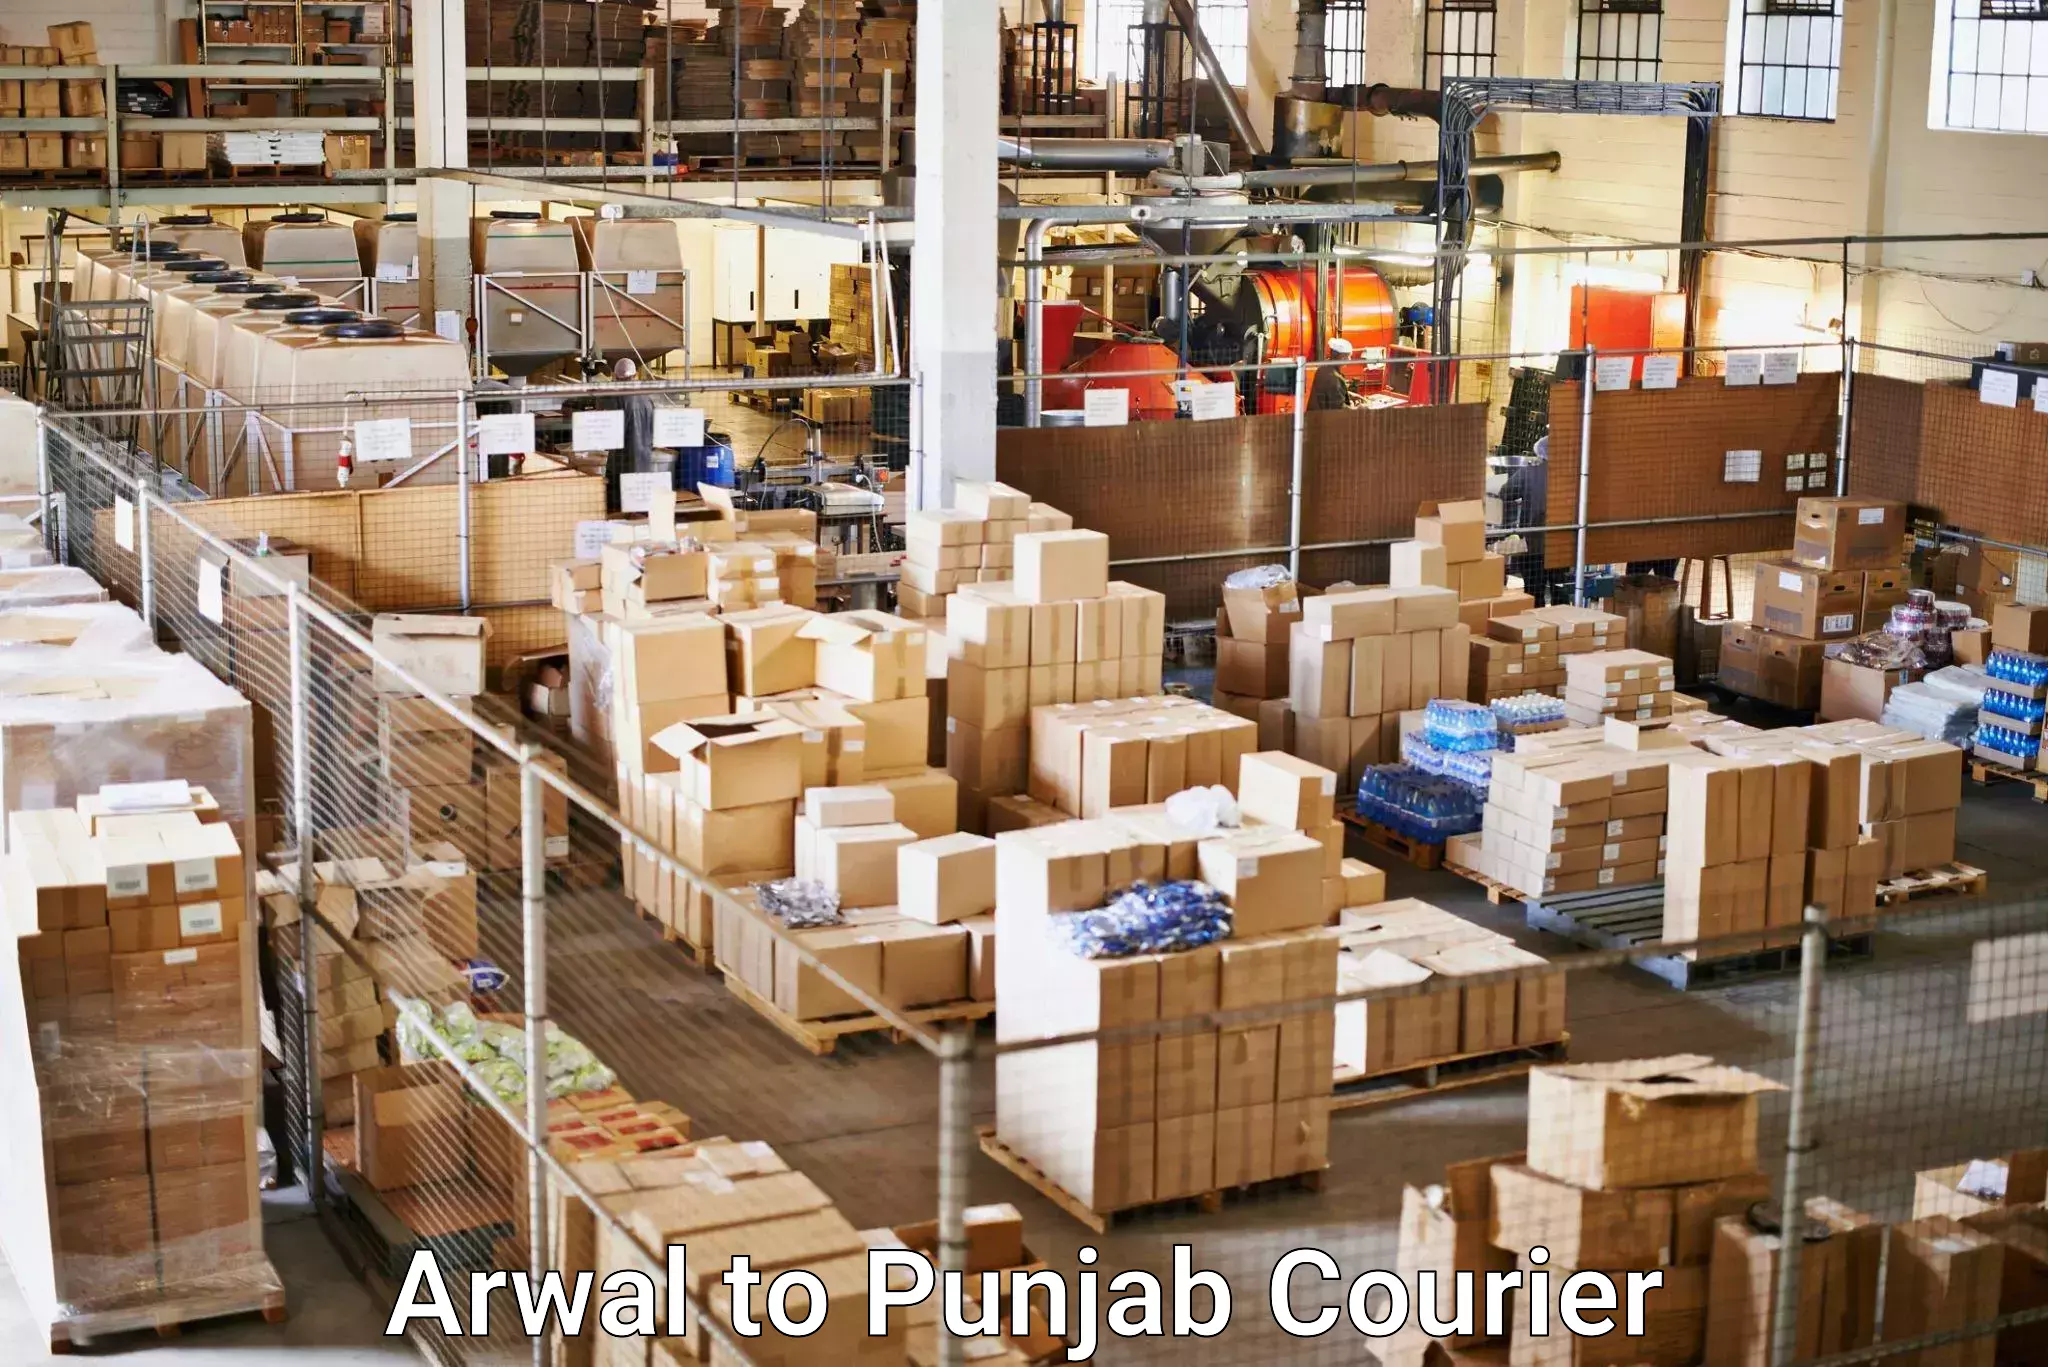 Efficient freight service Arwal to Punjab